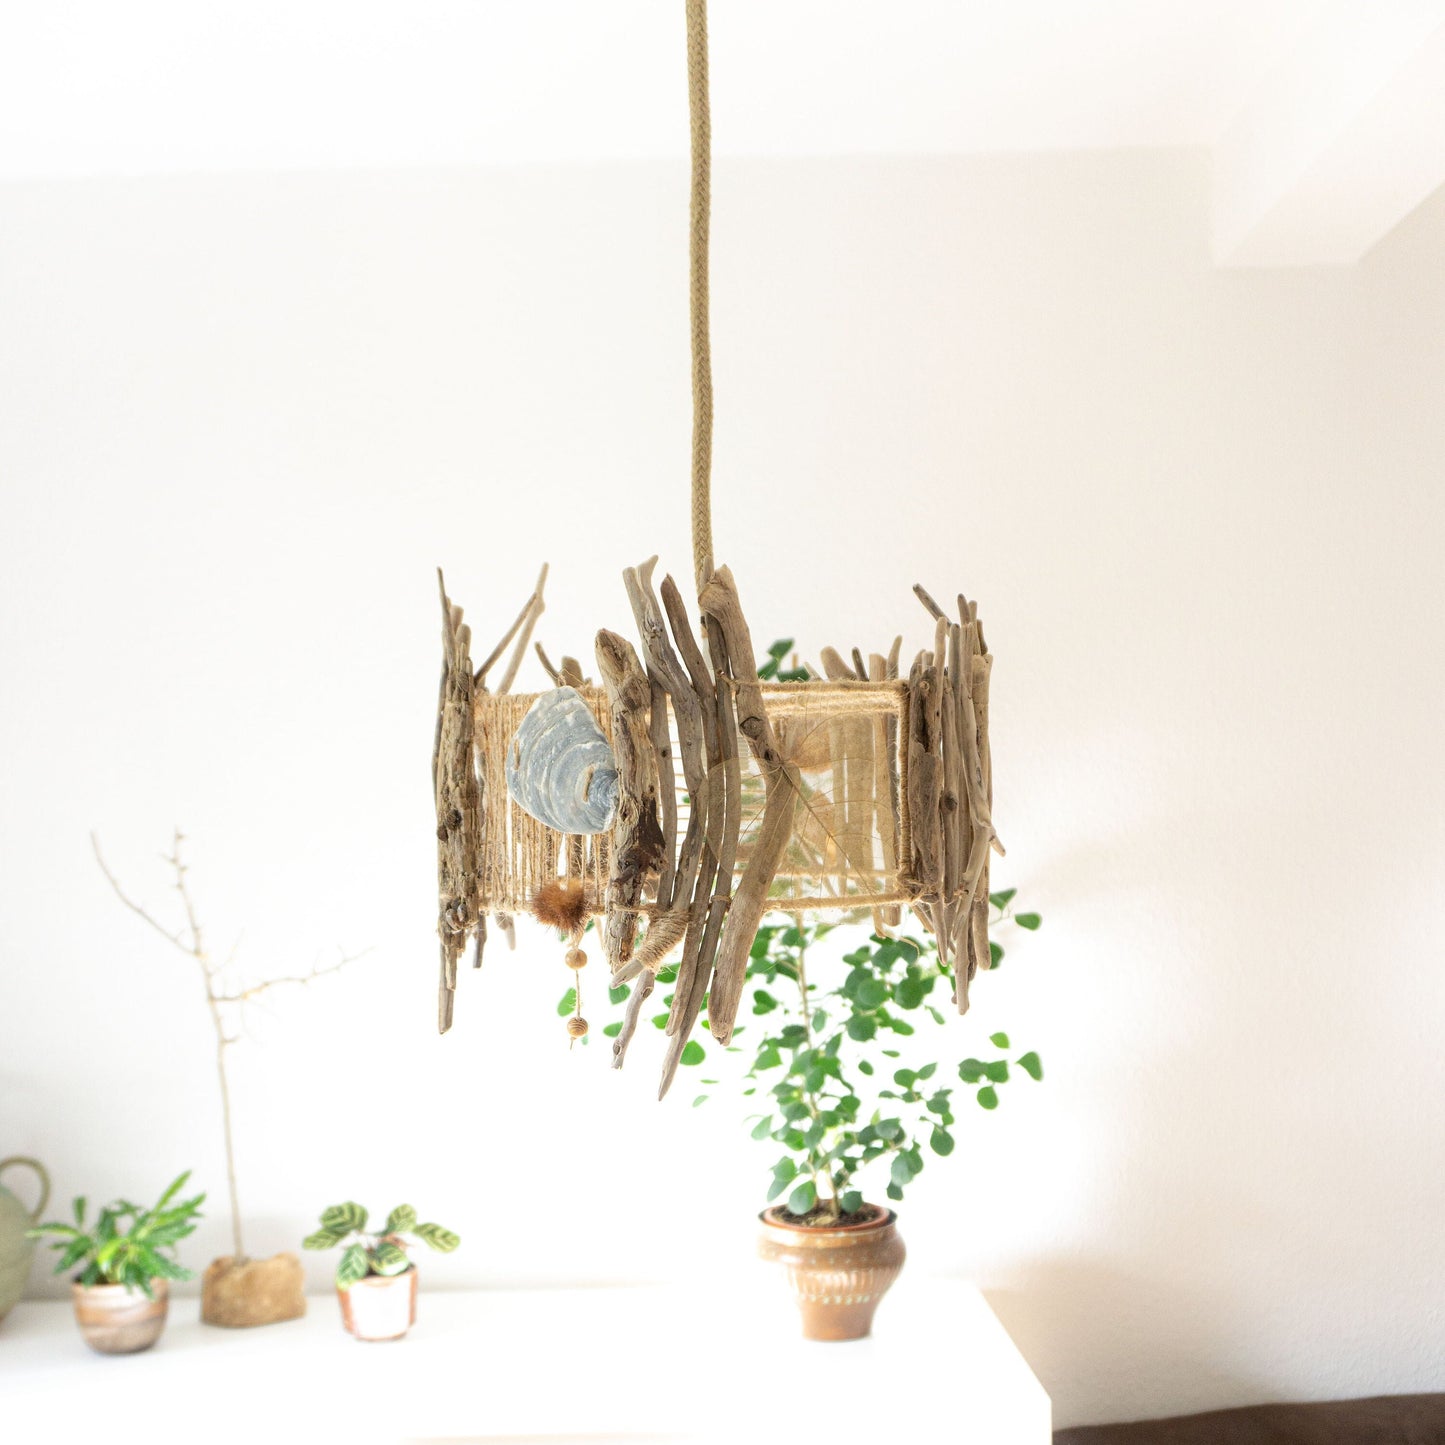 Unique DRIFTWOOD PENDANT LIGHT 'Oslo', hand-crafted ceiling lamp by StoneSoftArt